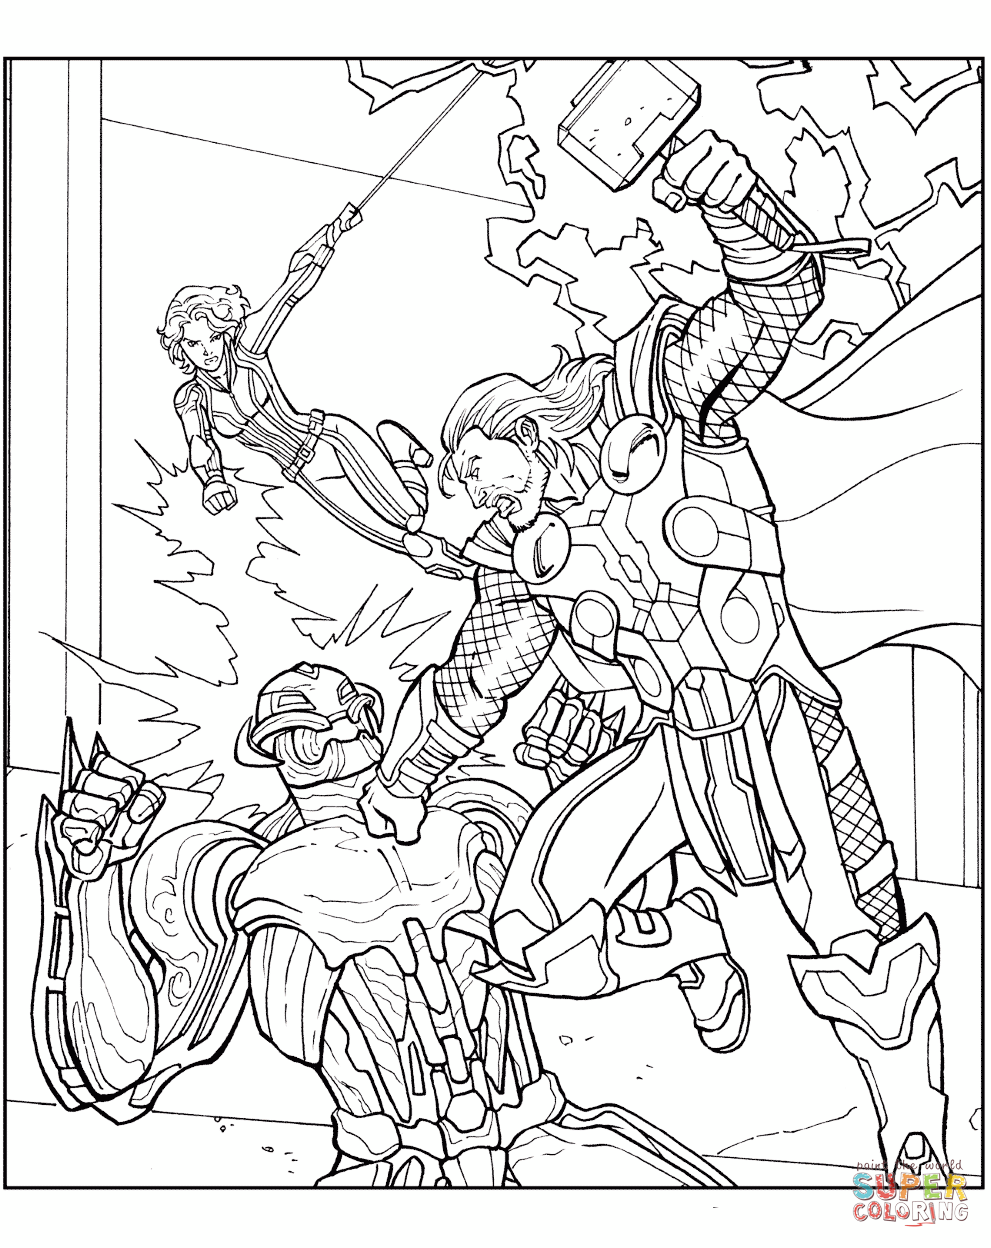 Thor vs chitauri coloring page free printable coloring pages